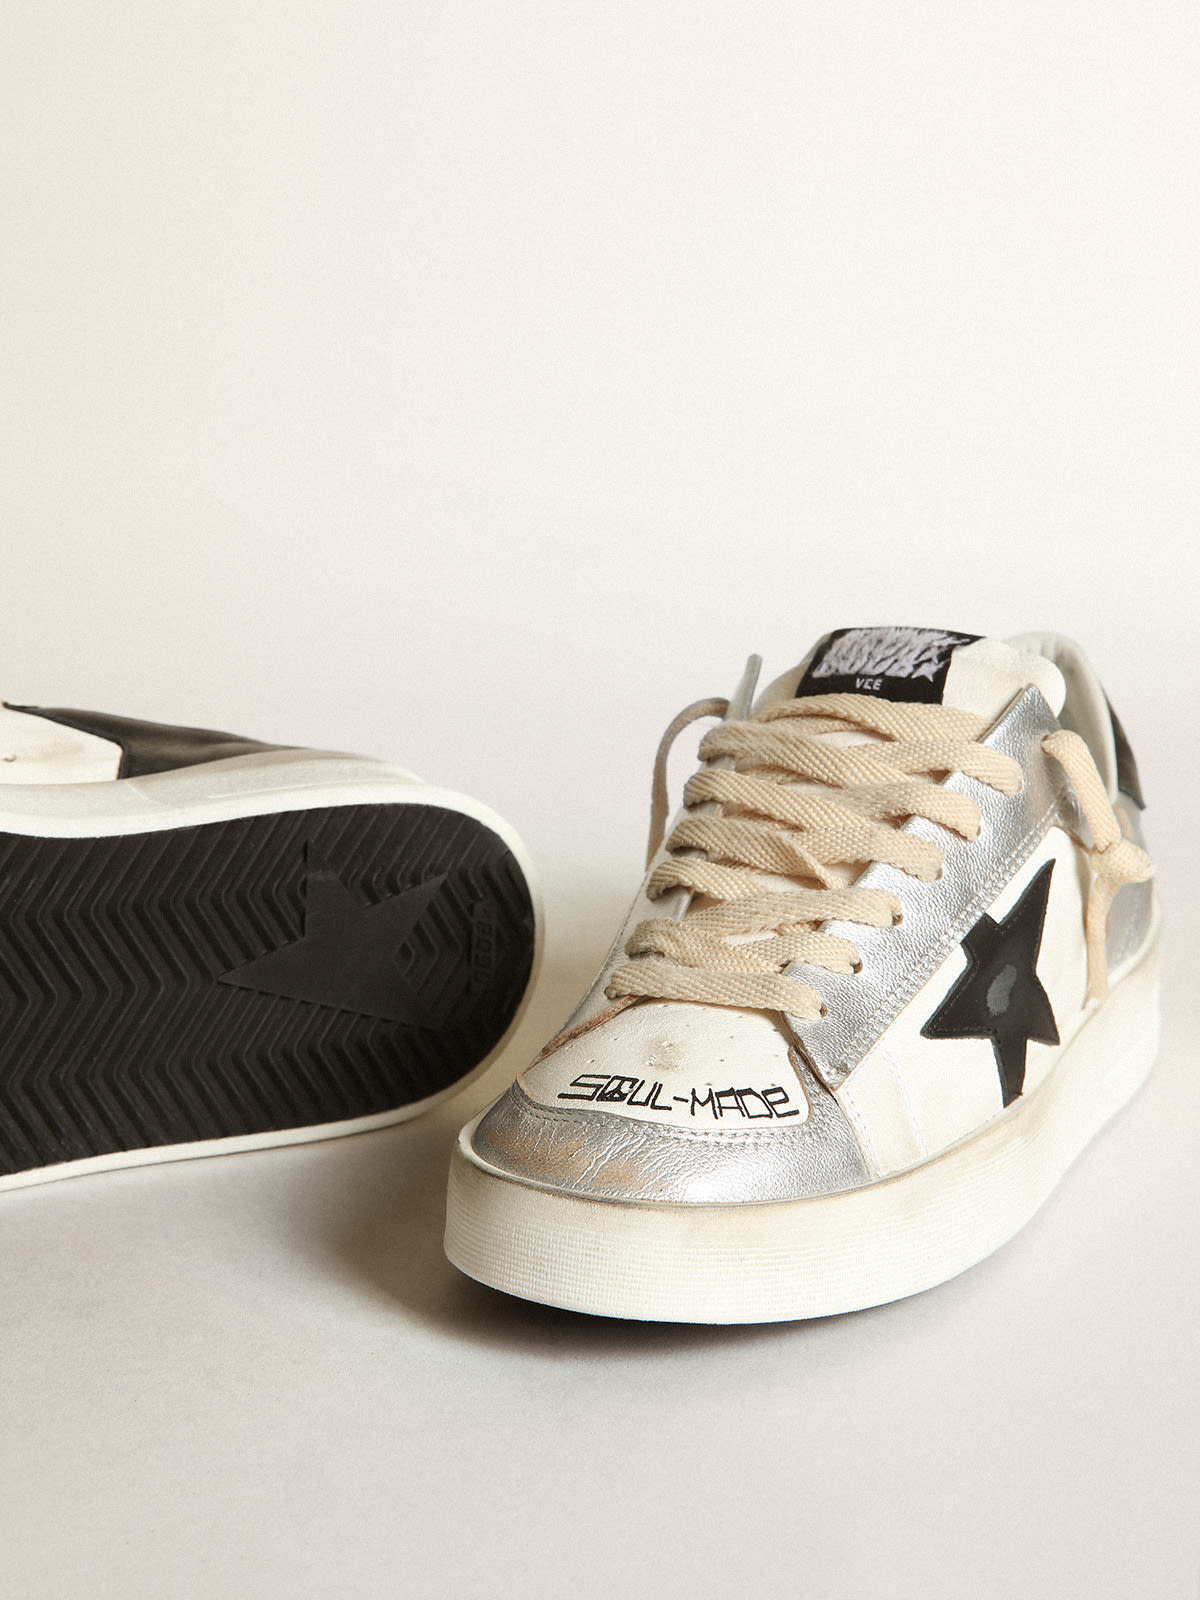 Golden Goose - Women’s Stardan sneakers in silver laminated leather with white nappa leather inserts and a black leather star in 